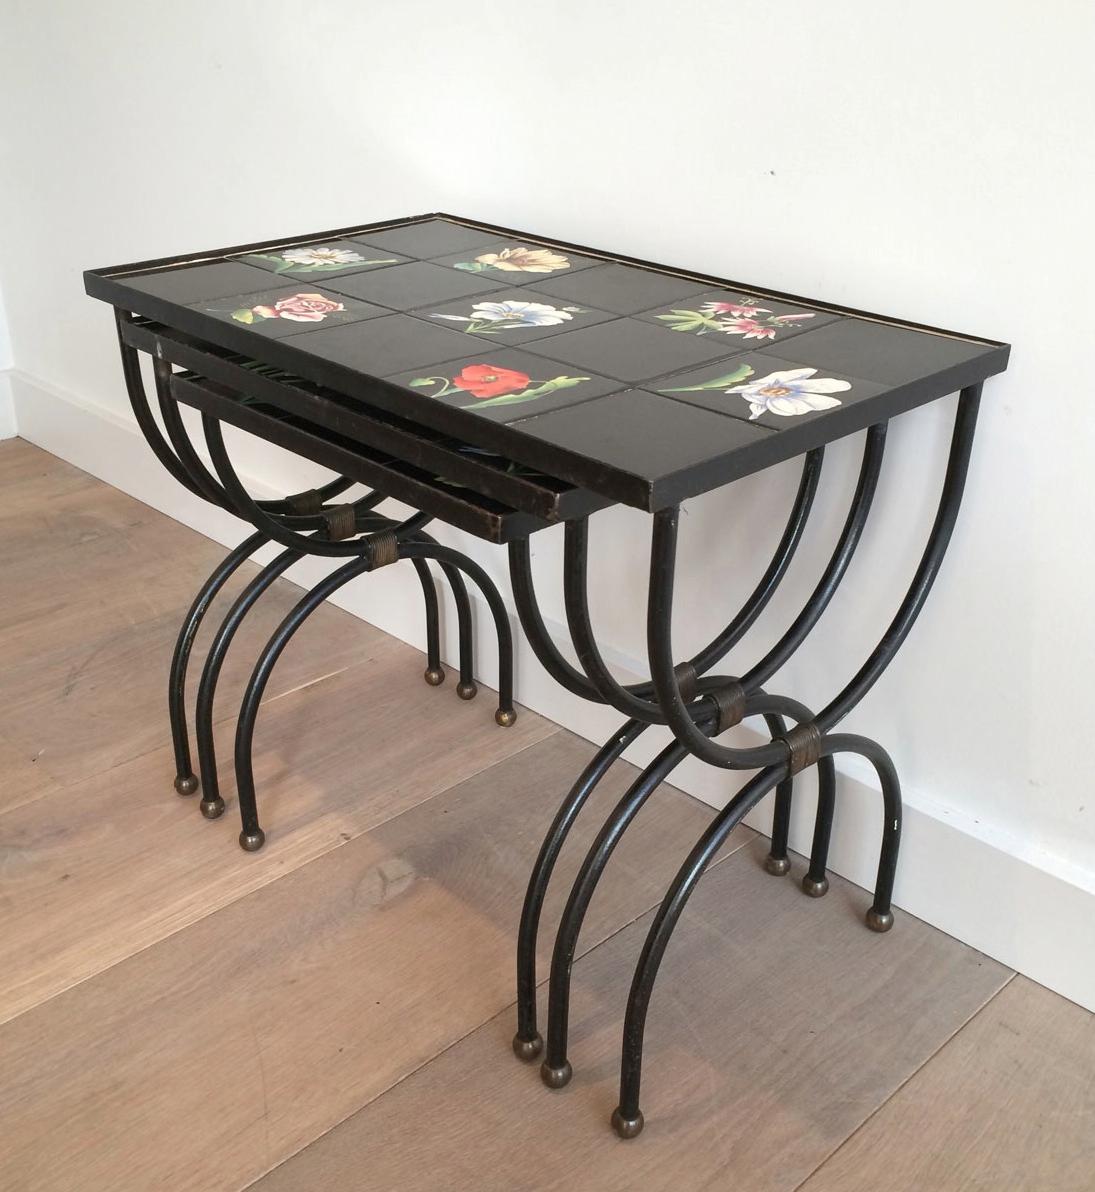 Unusual Ceramic and Black Iron Nesting Tables, French Work, circa 1950 For Sale 1